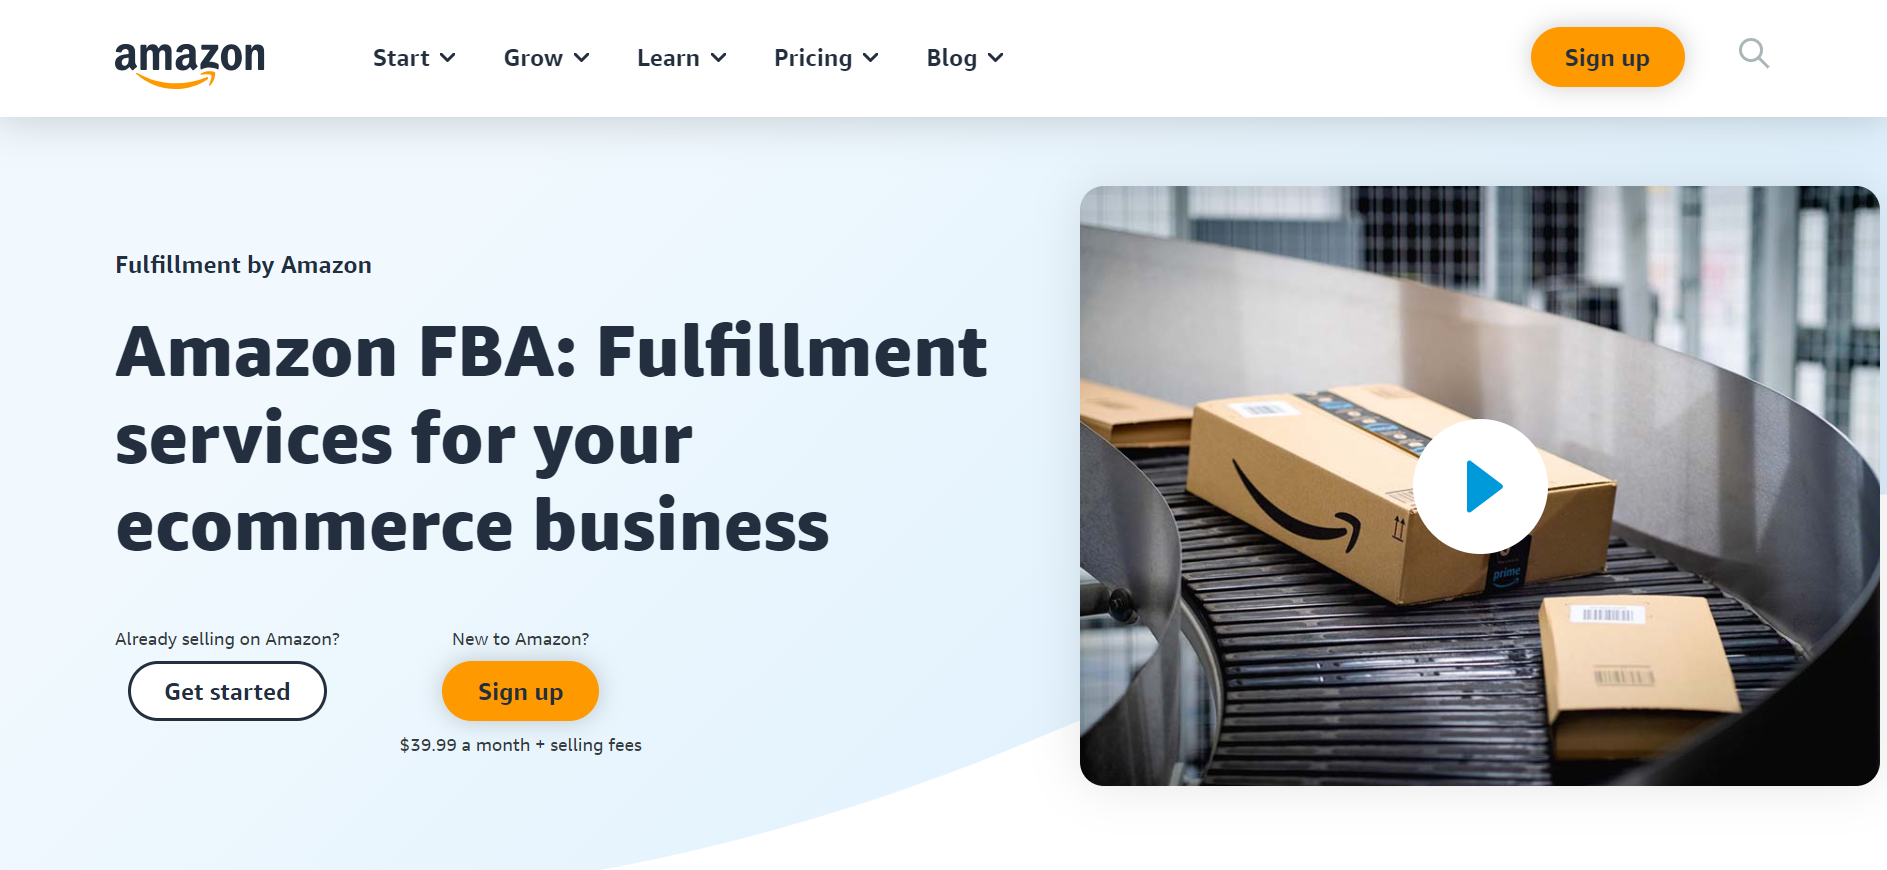 best amazon fba product research tool